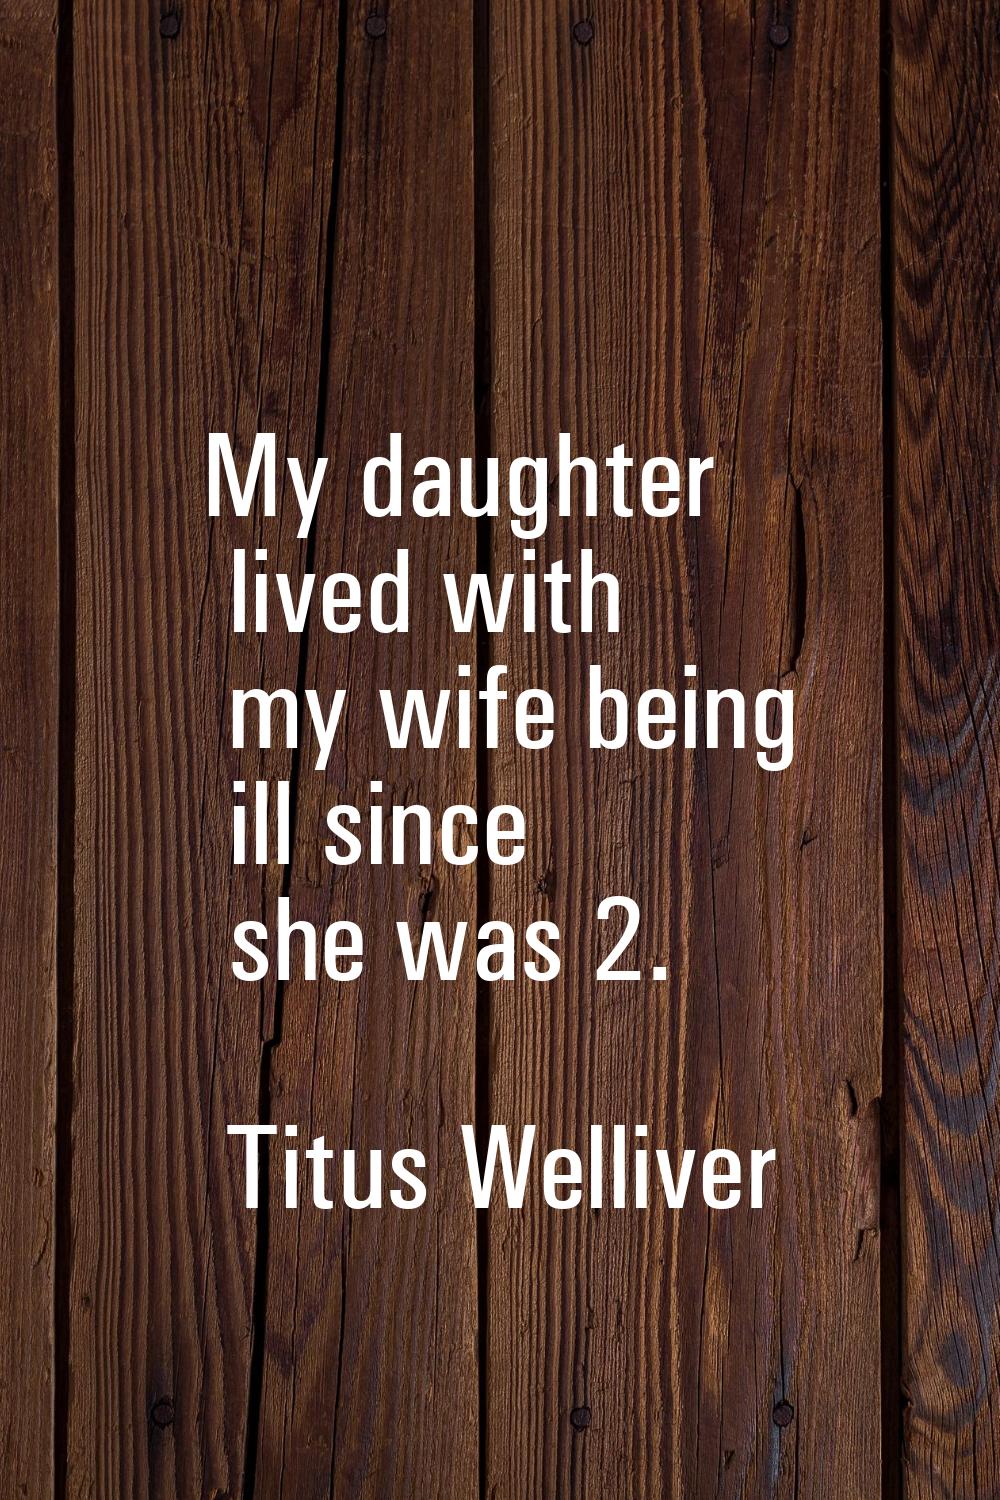 My daughter lived with my wife being ill since she was 2.